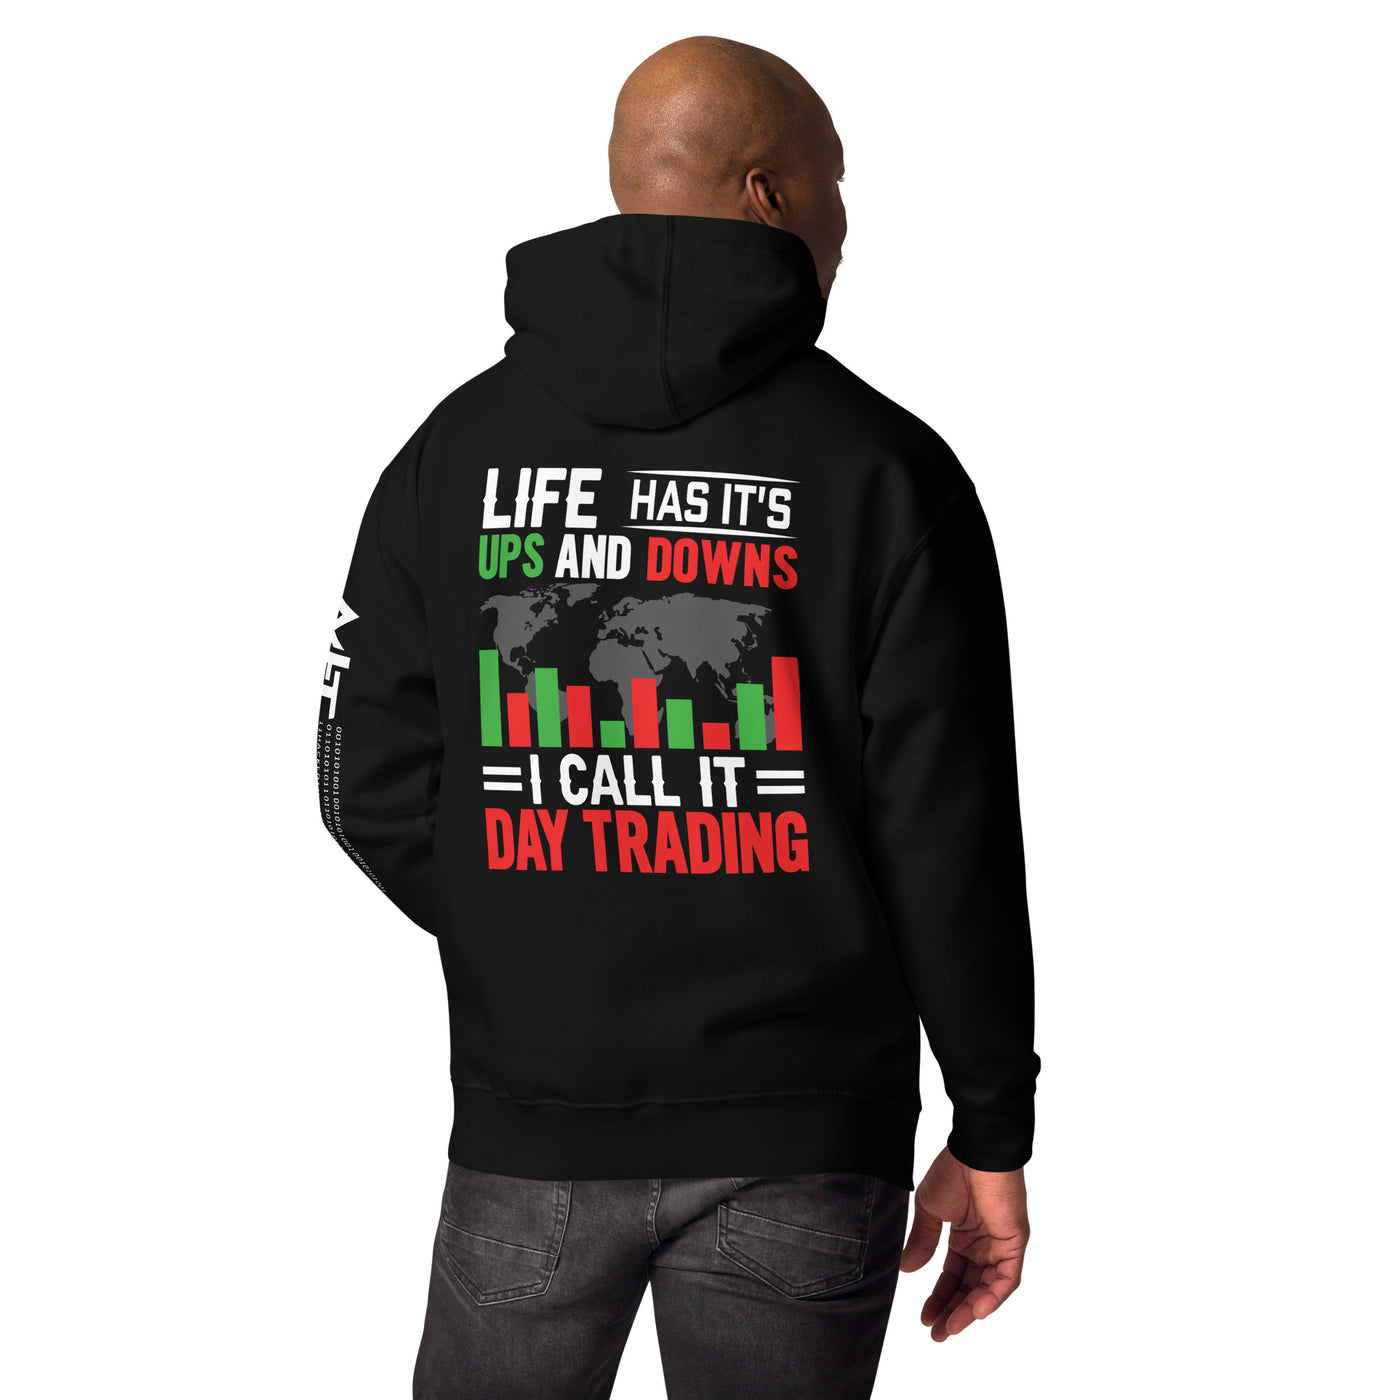 Life has its ups and downs; I call it Day Trading - Unisex Hoodie